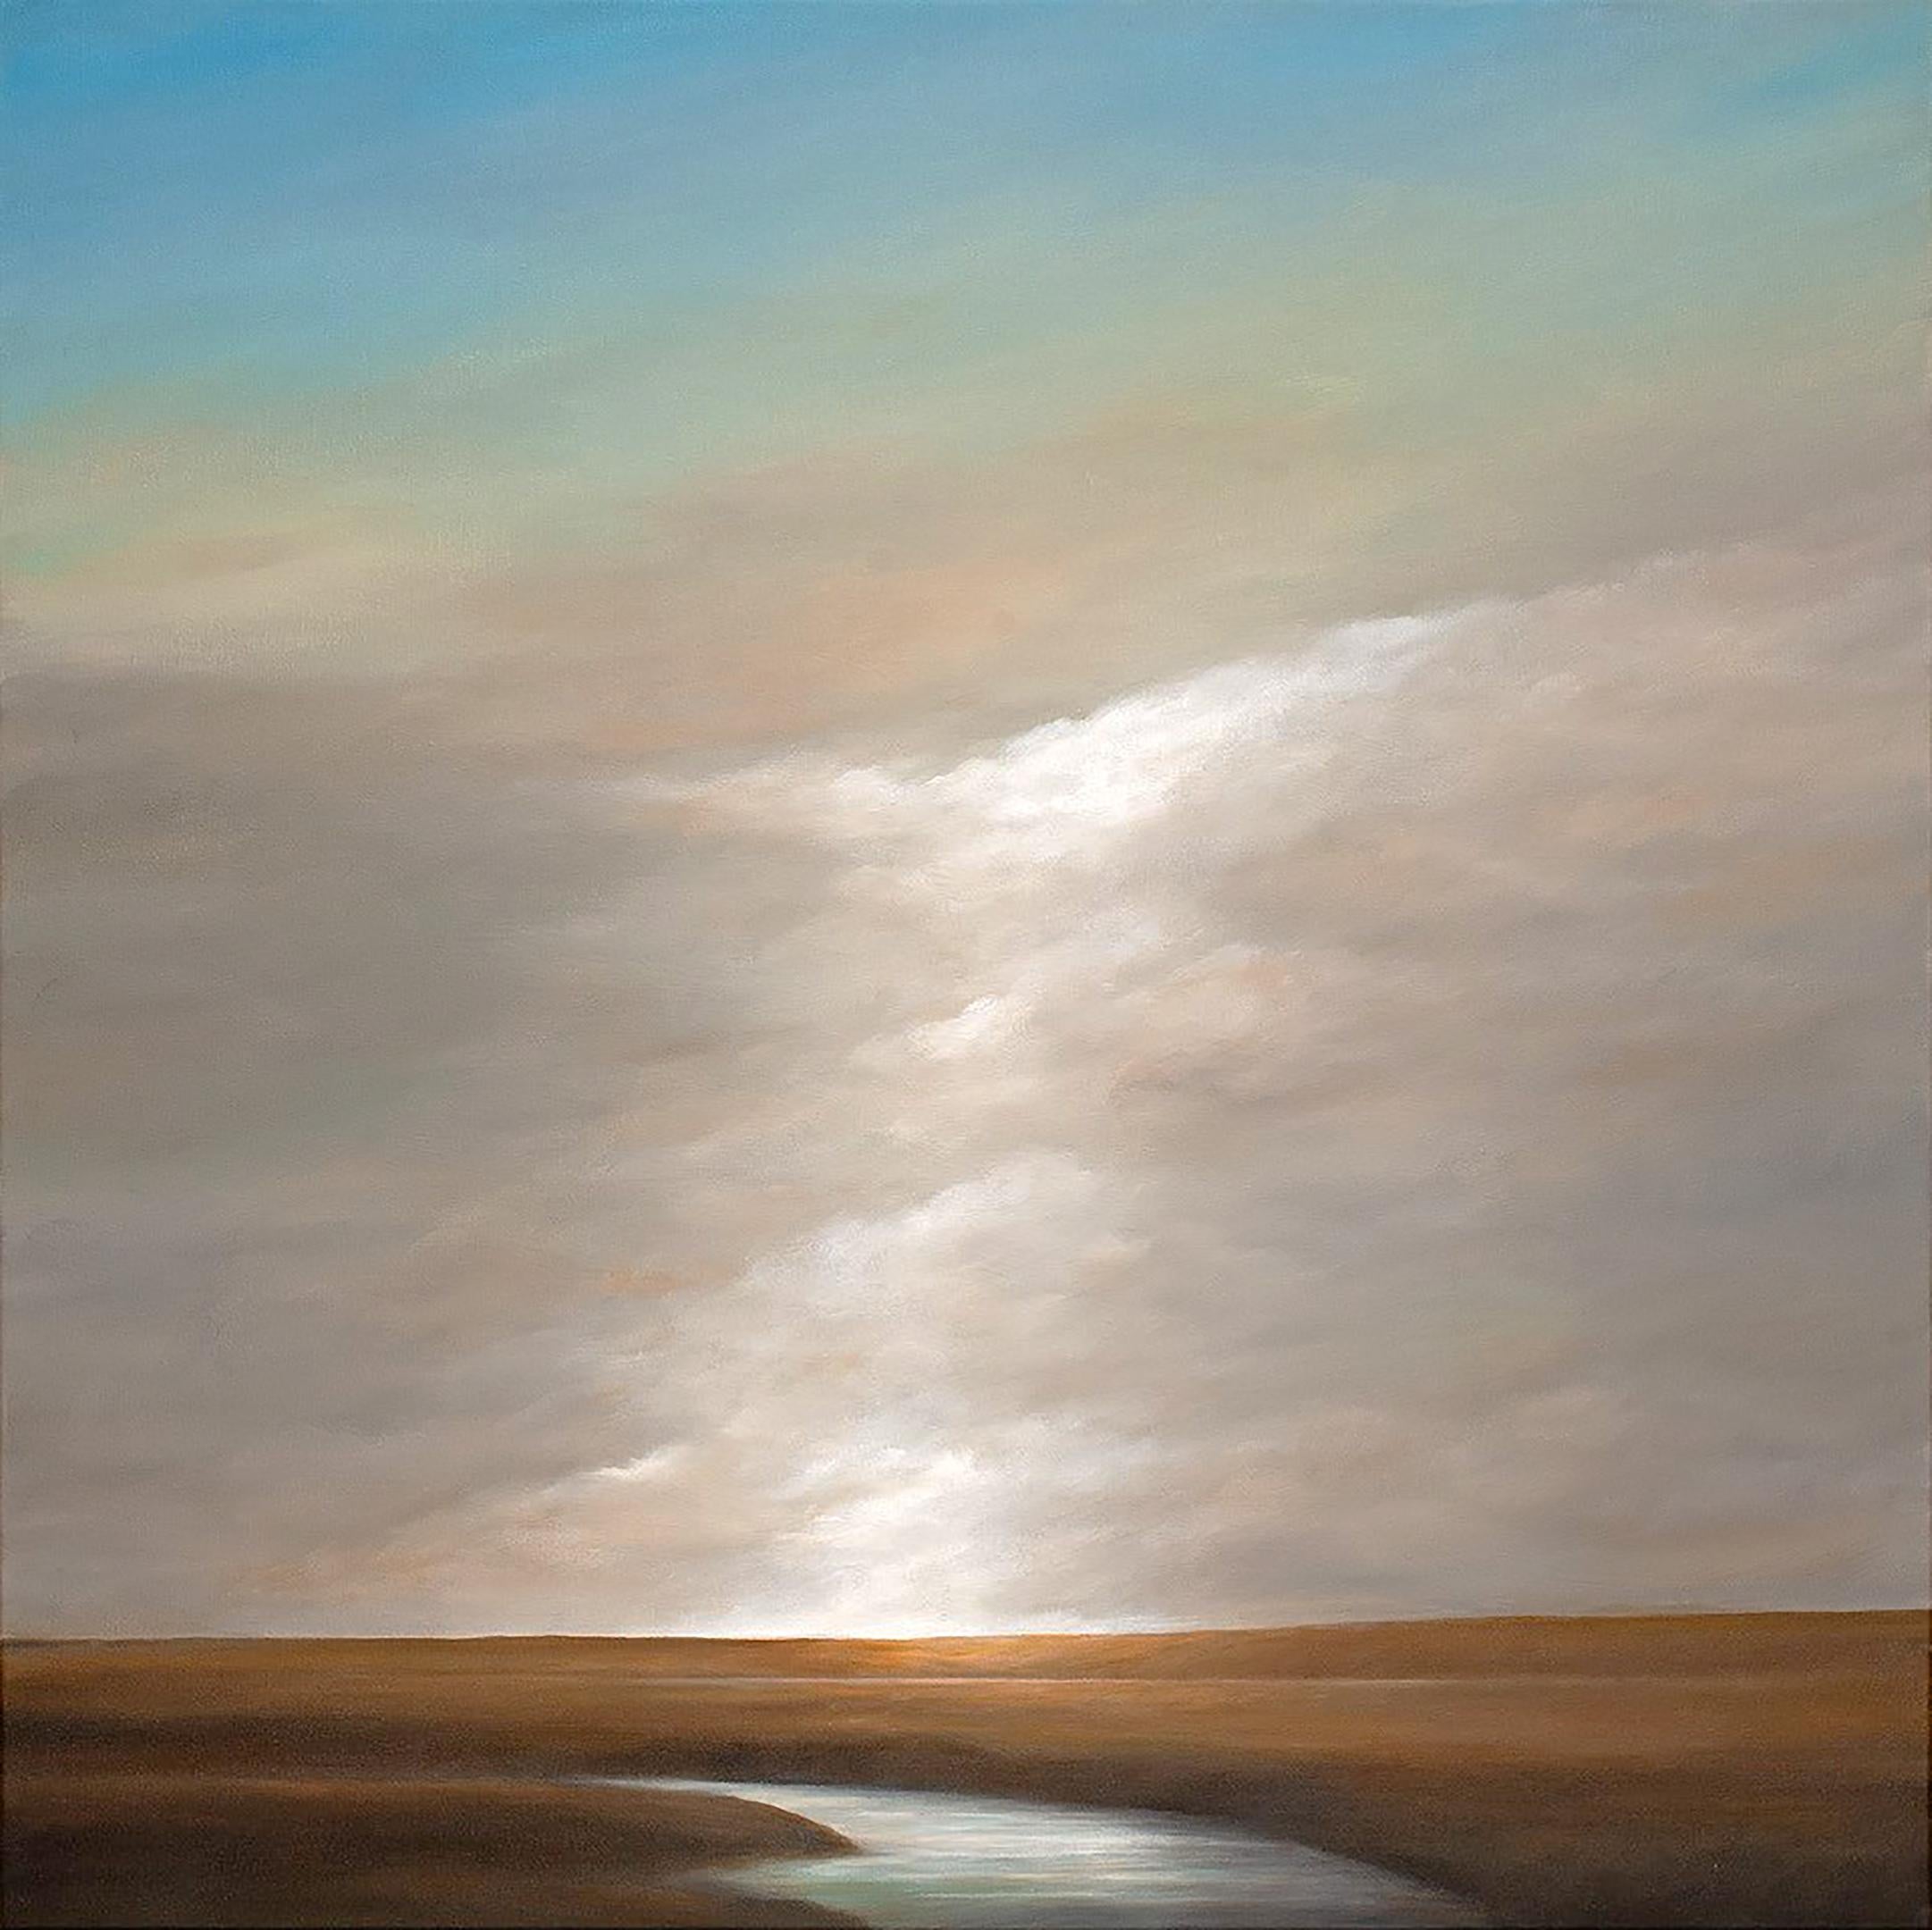 Ascending Light - Original Oil Painting with Dramatic Sky and Landscape